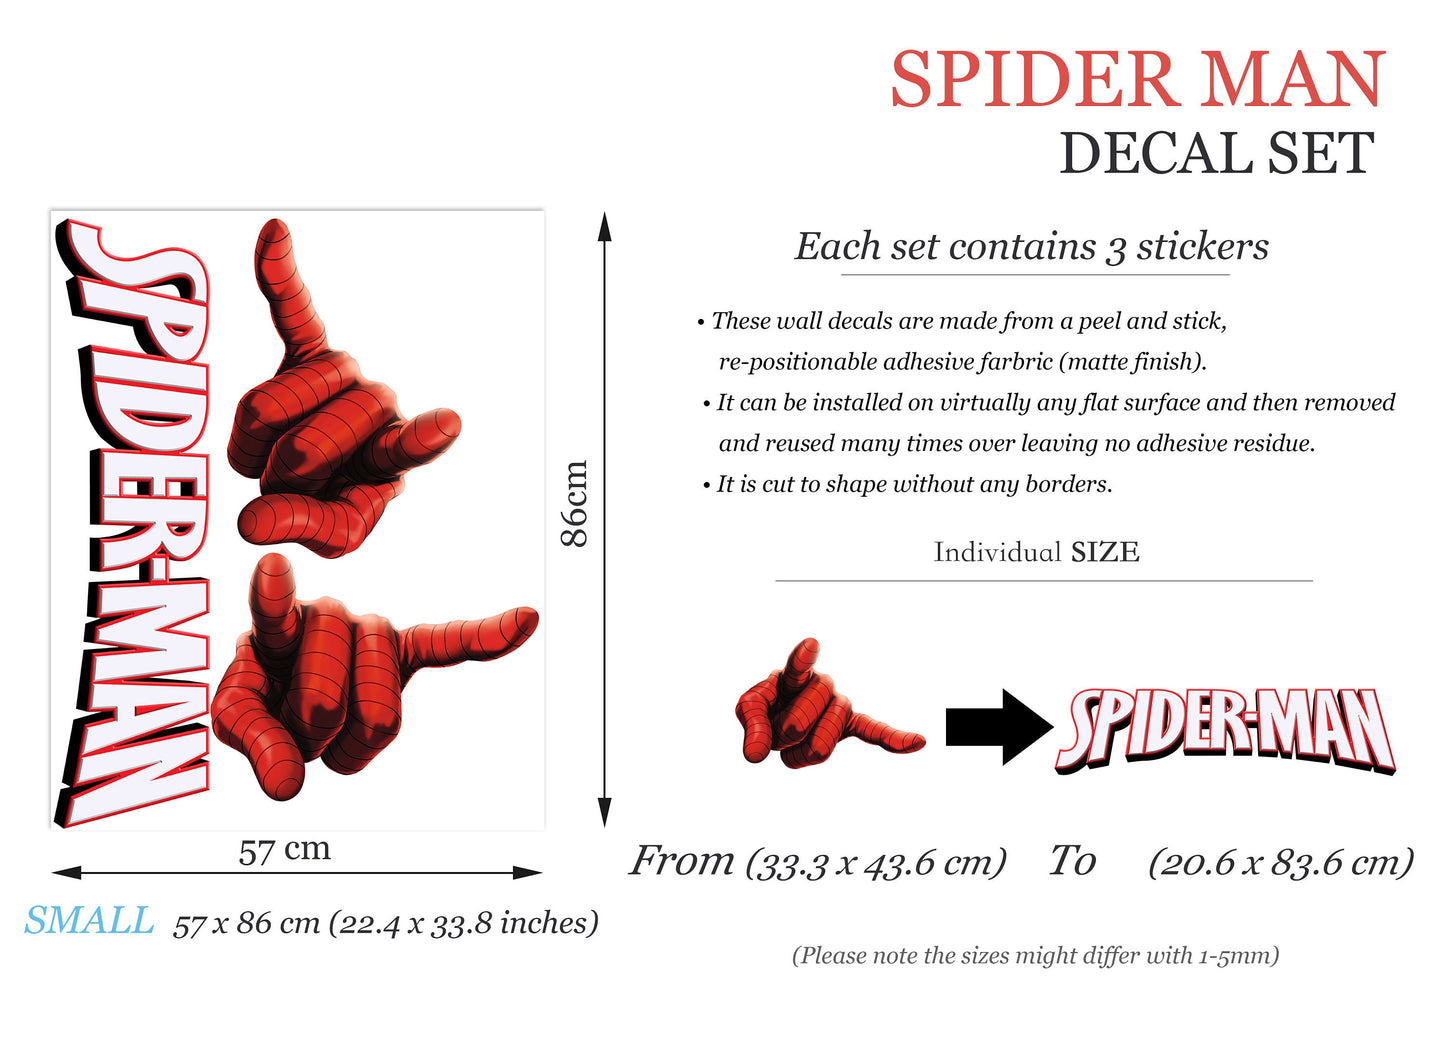 Spider-Man Web-Slinging Hands Wall Decal - Action Hero Decor - BR414